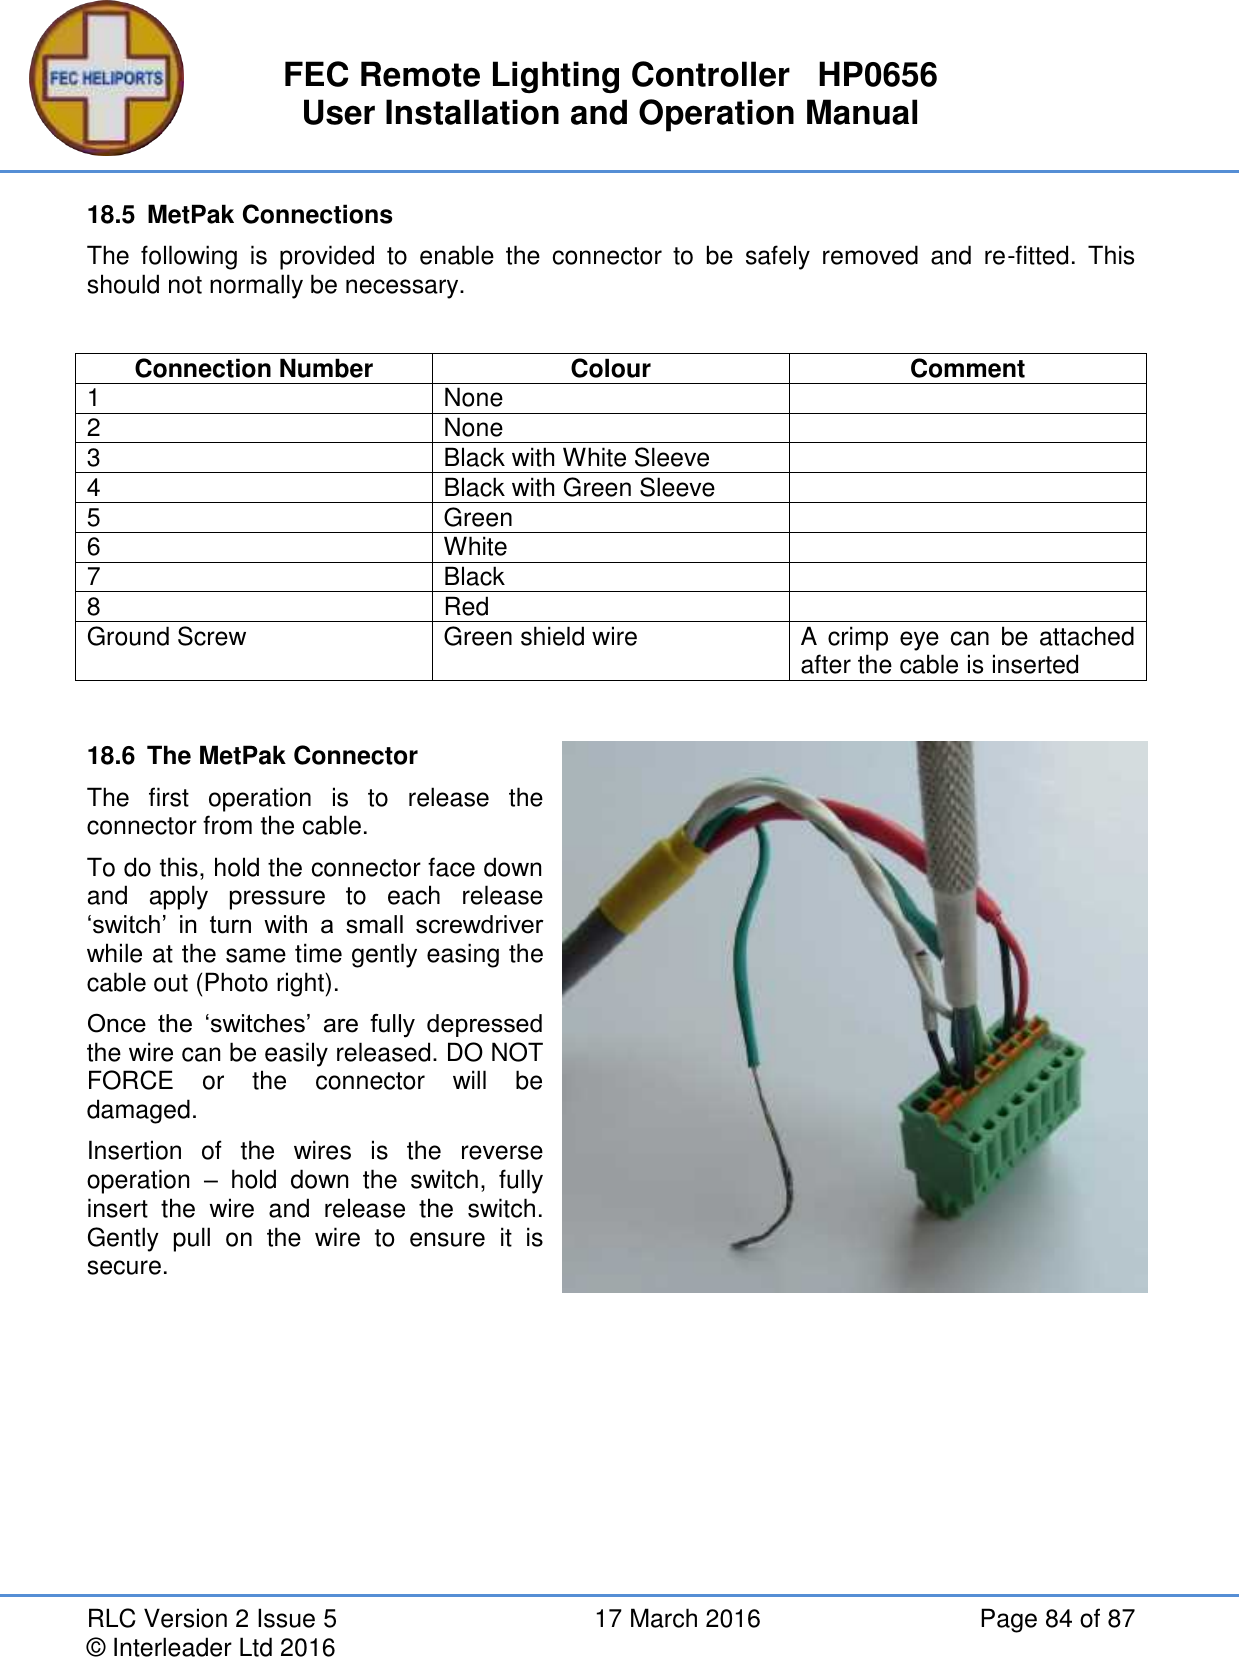 FEC Remote Lighting Controller   HP0656 User Installation and Operation Manual RLC Version 2 Issue 5  17 March 2016  Page 84 of 87 © Interleader Ltd 2016 18.5  MetPak Connections The  following  is  provided  to  enable  the  connector  to  be  safely  removed  and  re-fitted.  This should not normally be necessary.  Connection Number Colour Comment 1 None  2 None  3 Black with White Sleeve  4 Black with Green Sleeve  5 Green  6 White  7 Black  8 Red  Ground Screw Green shield wire A crimp  eye can be attached after the cable is inserted  18.6  The MetPak Connector The  first  operation  is  to  release  the connector from the cable. To do this, hold the connector face down and  apply  pressure  to  each  release ‘switch’  in  turn  with  a  small  screwdriver while at the same time gently easing the cable out (Photo right). Once  the  ‘switches’  are  fully  depressed the wire can be easily released. DO NOT FORCE  or  the  connector  will  be damaged. Insertion  of  the  wires  is  the  reverse operation  –  hold  down  the  switch,  fully insert  the  wire  and  release  the  switch. Gently  pull  on  the  wire  to  ensure  it  is secure.    